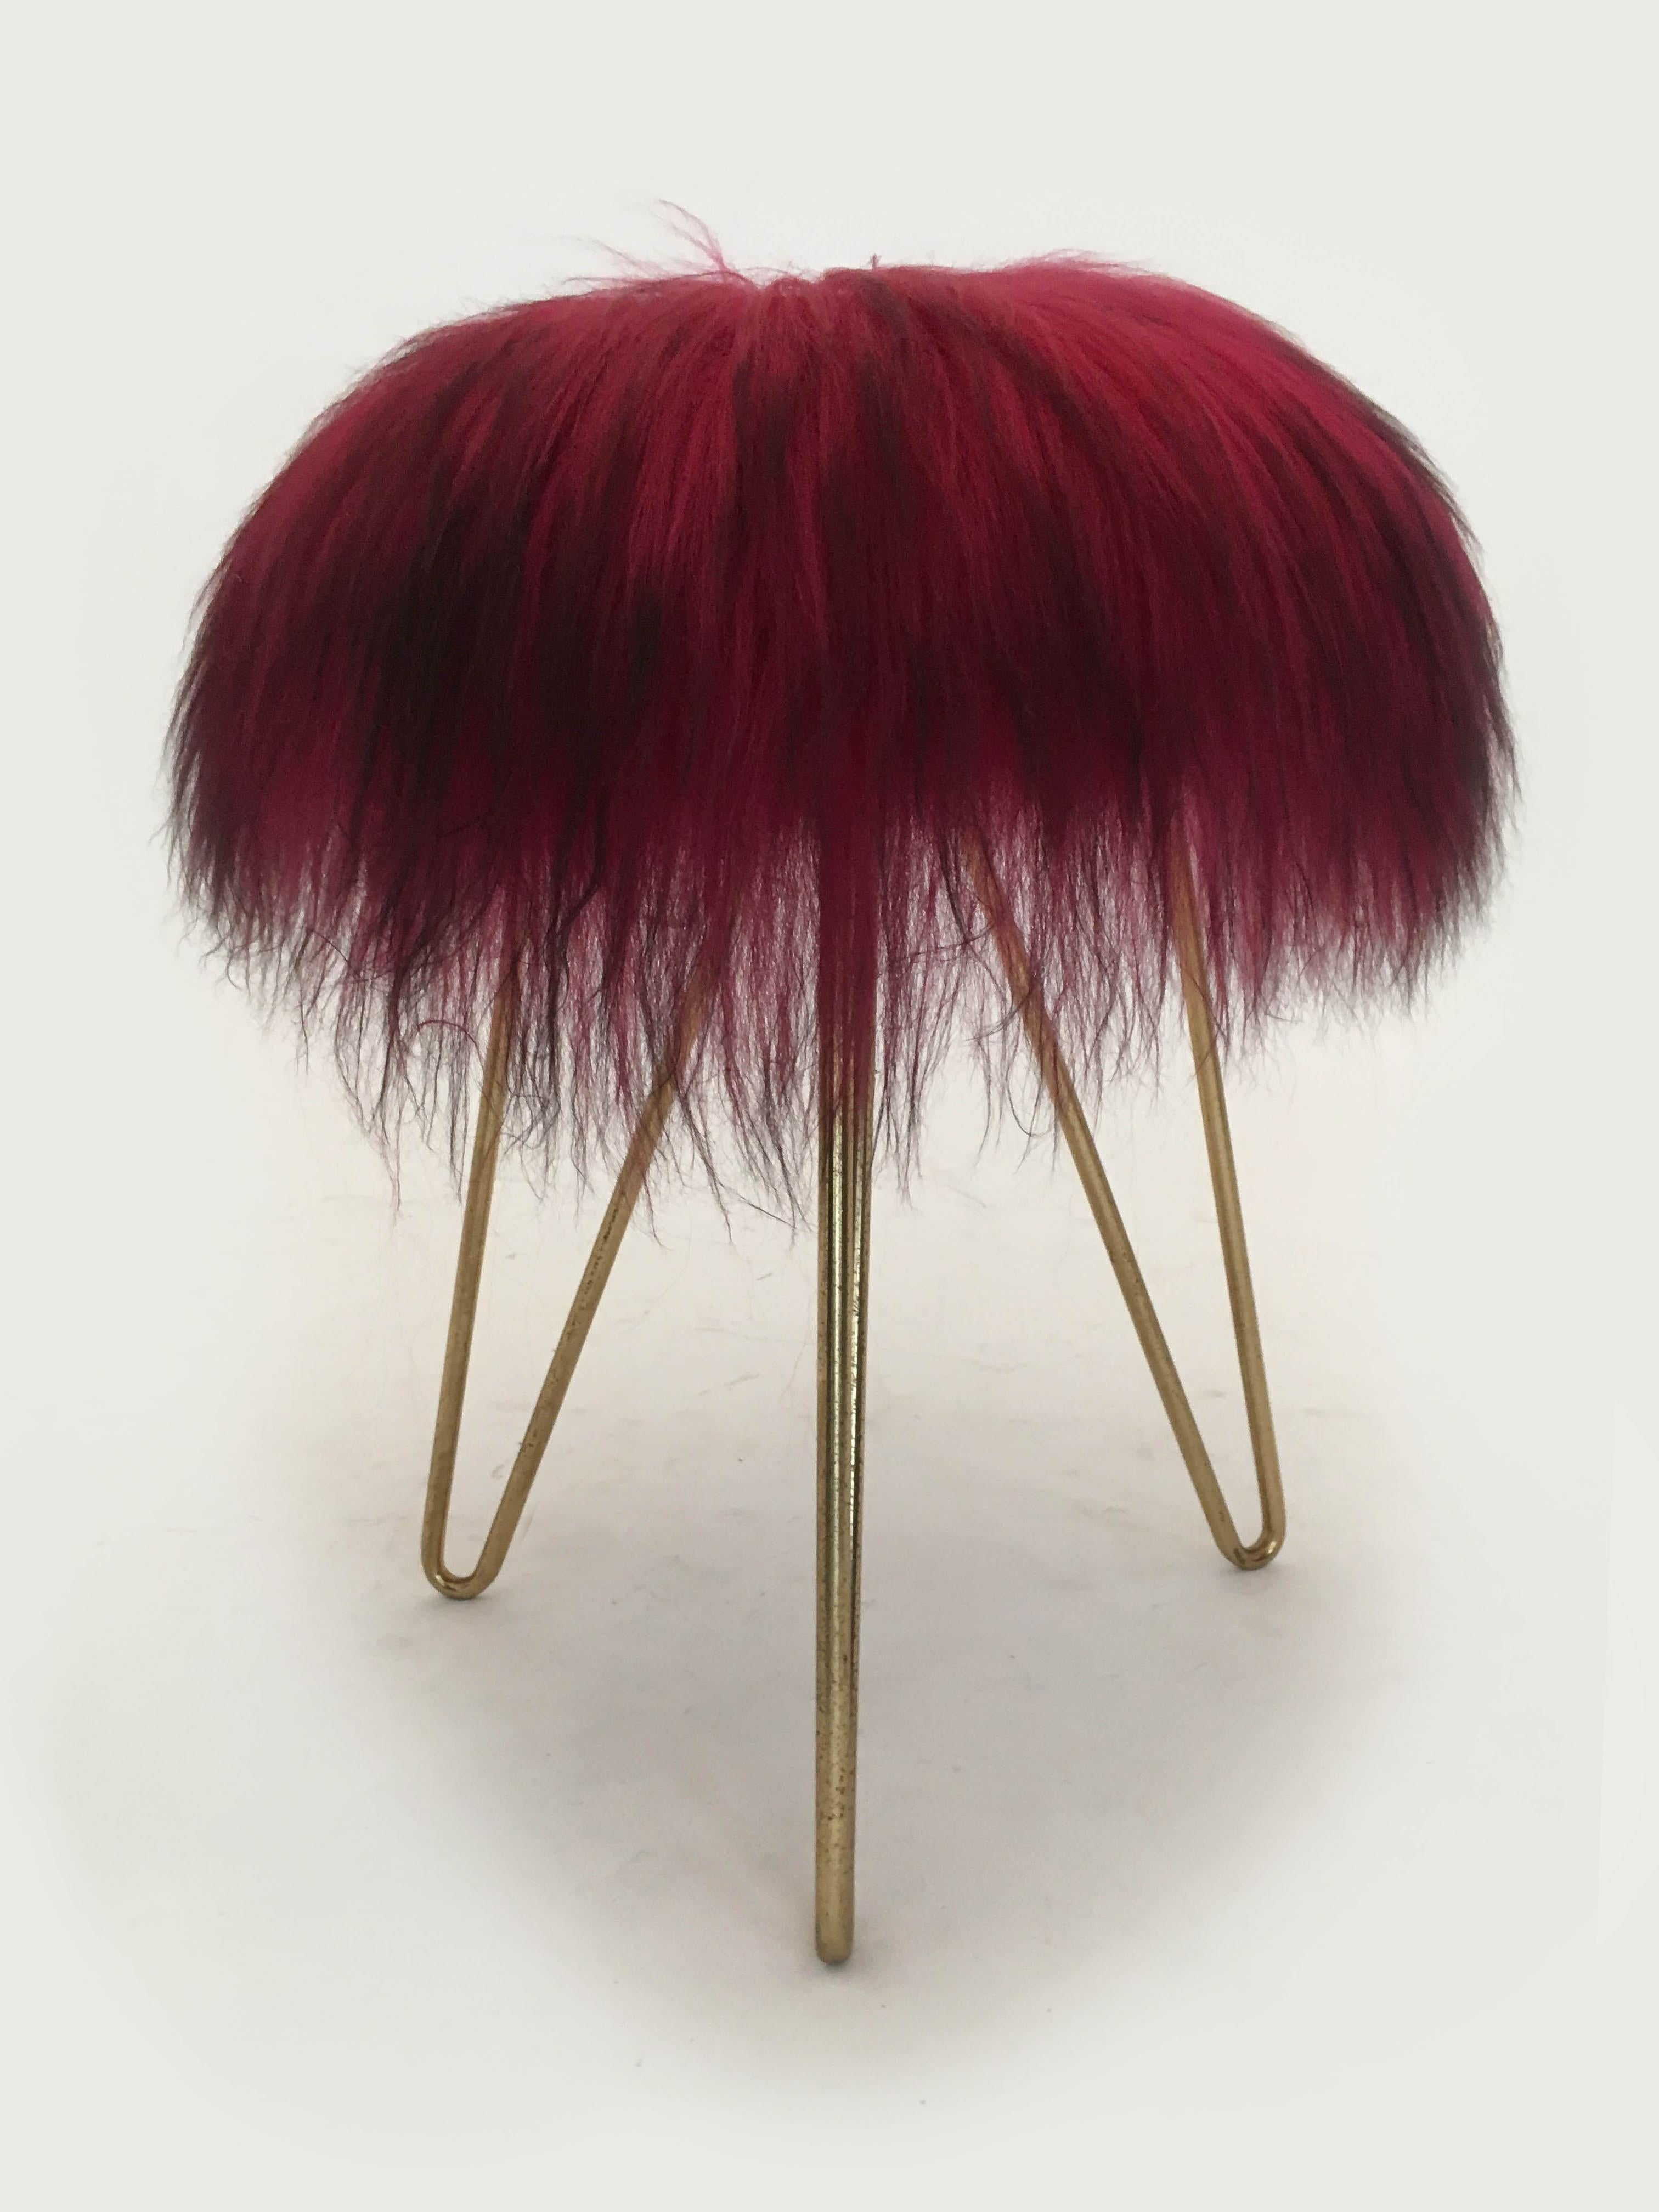 Delightful pair of sheep fur stools, France, 1950s. In excellent vintage condition with just the right amount of gently aged patina on the hair pin brass legs. The fur is clean and firm almost like new, although truly vintage from the 1950s and has